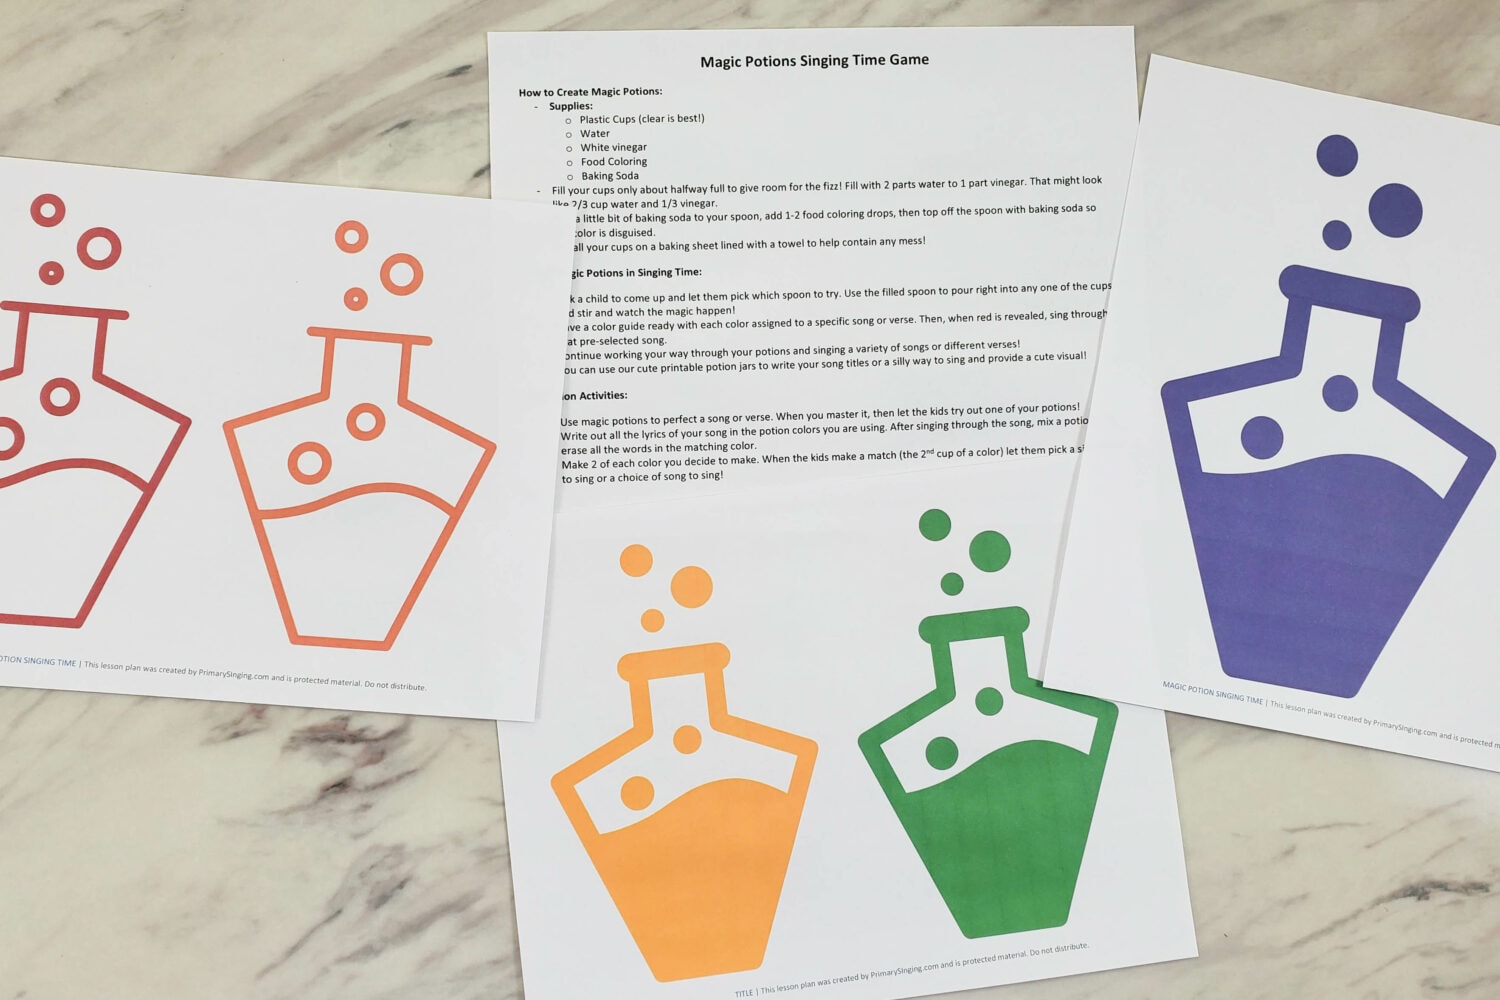 How to Make a Magic Potion - DIY easy potions for kids with ingredients, recipes, step-by-step directions and tutorial plus fun ways to incorporate a learning activity or singing time game with your fake Halloween potions! Includes printable potion bottle song visuals for LDS Primary Music Leaders.